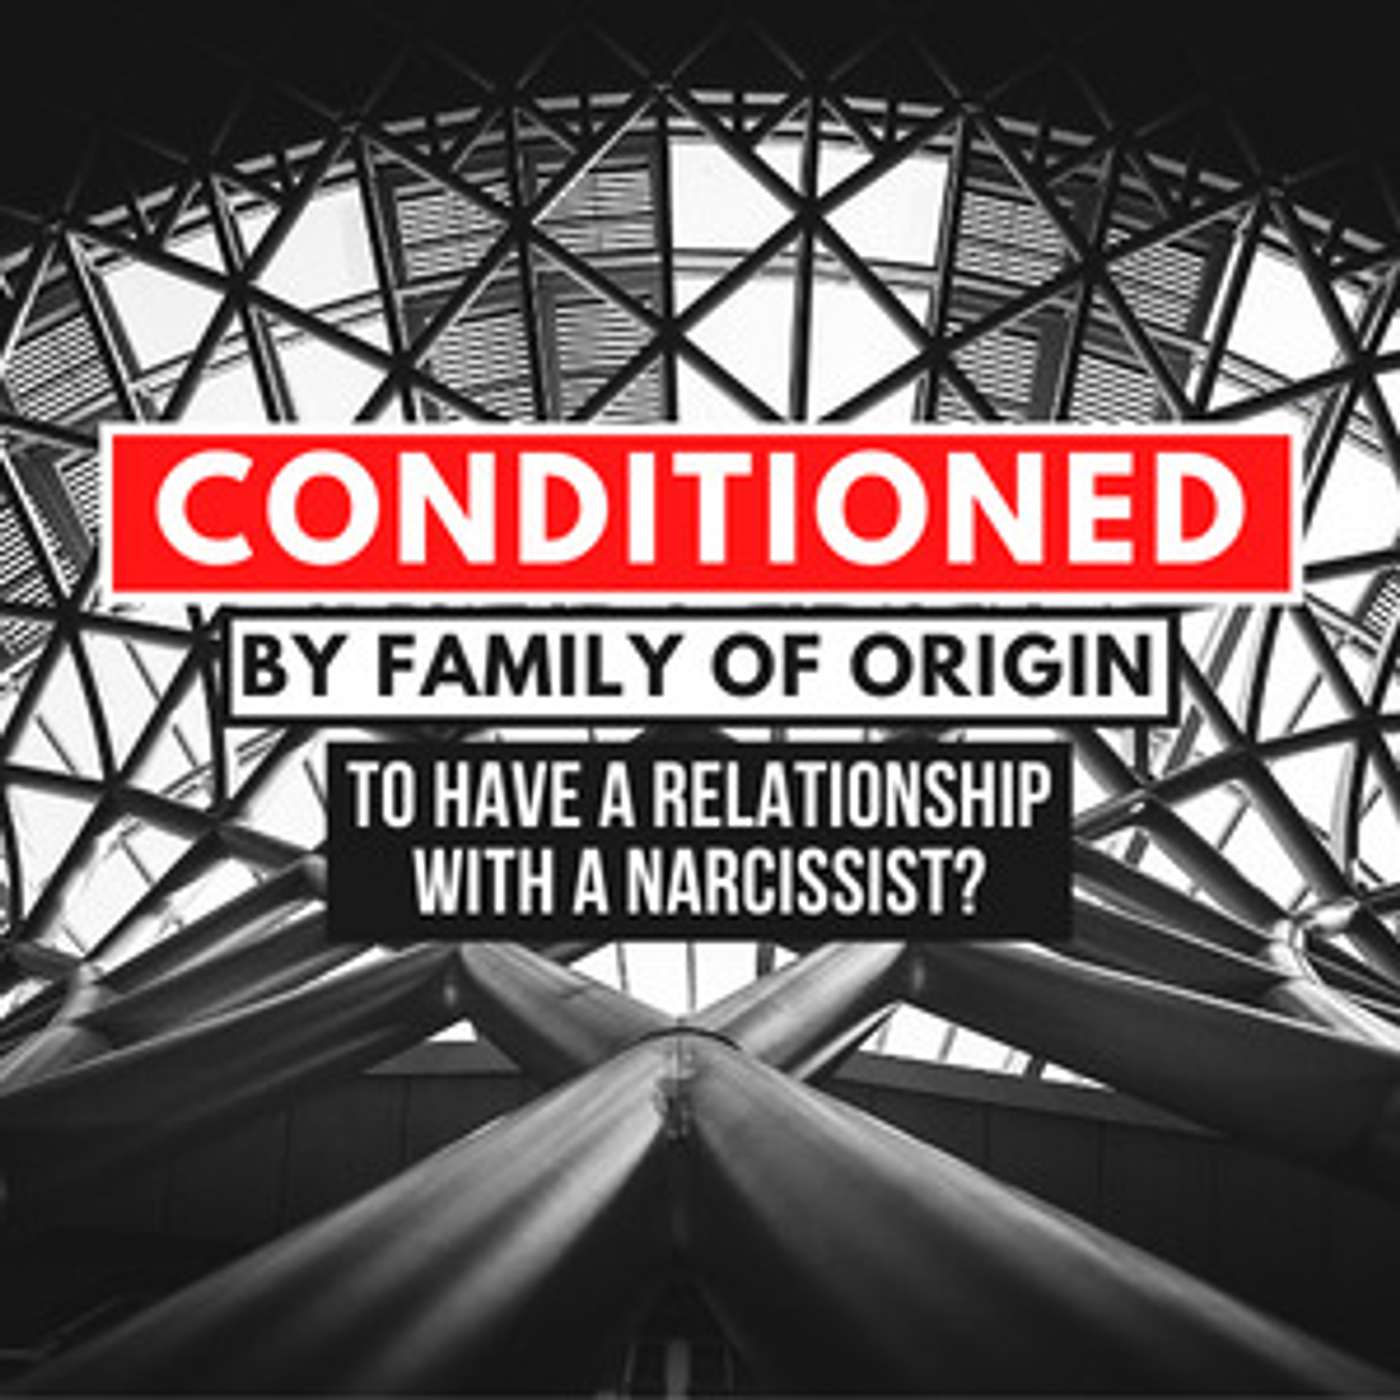 Was I Conditioned by Family of Origin to Have a Relationship with a Narcissist